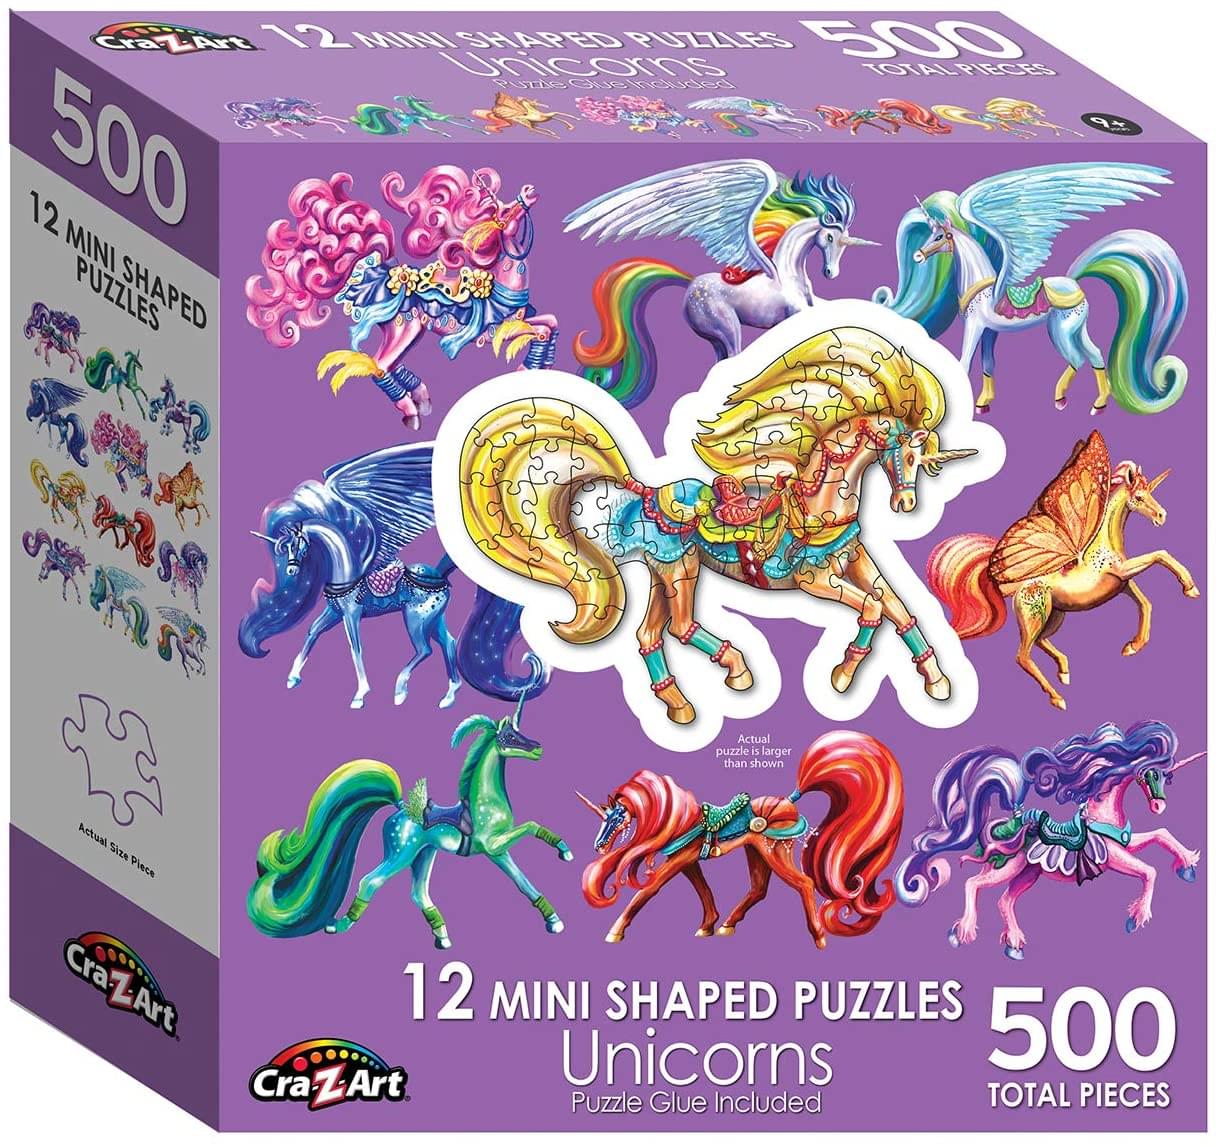 Enchainting Unicorns Collection of 12 Mini Shaped Puzzles | 500 Pieces Total